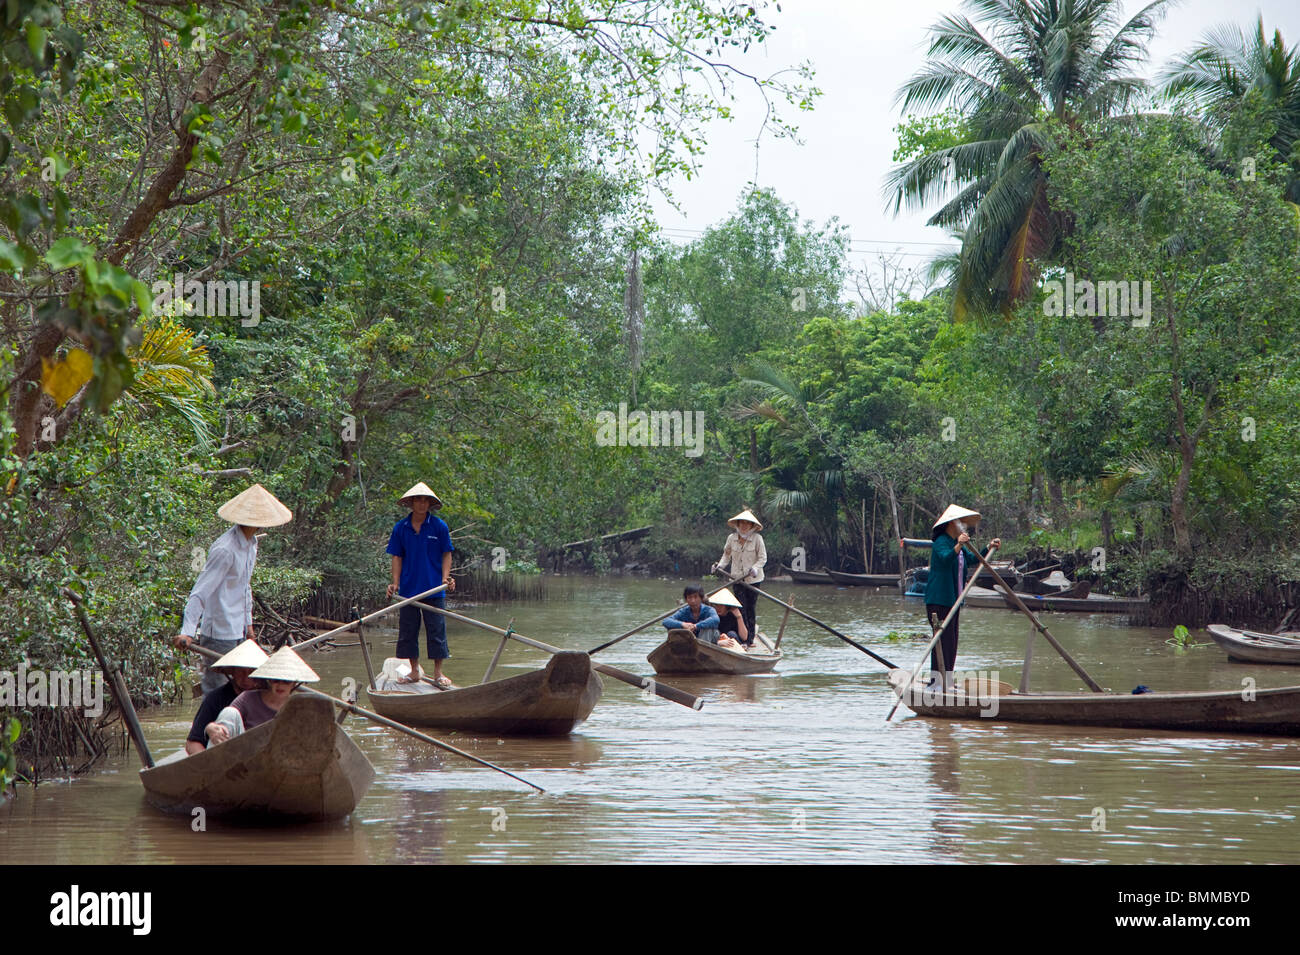 Typical Vietnamese boats in the Mekong River Delta area Stock Photo